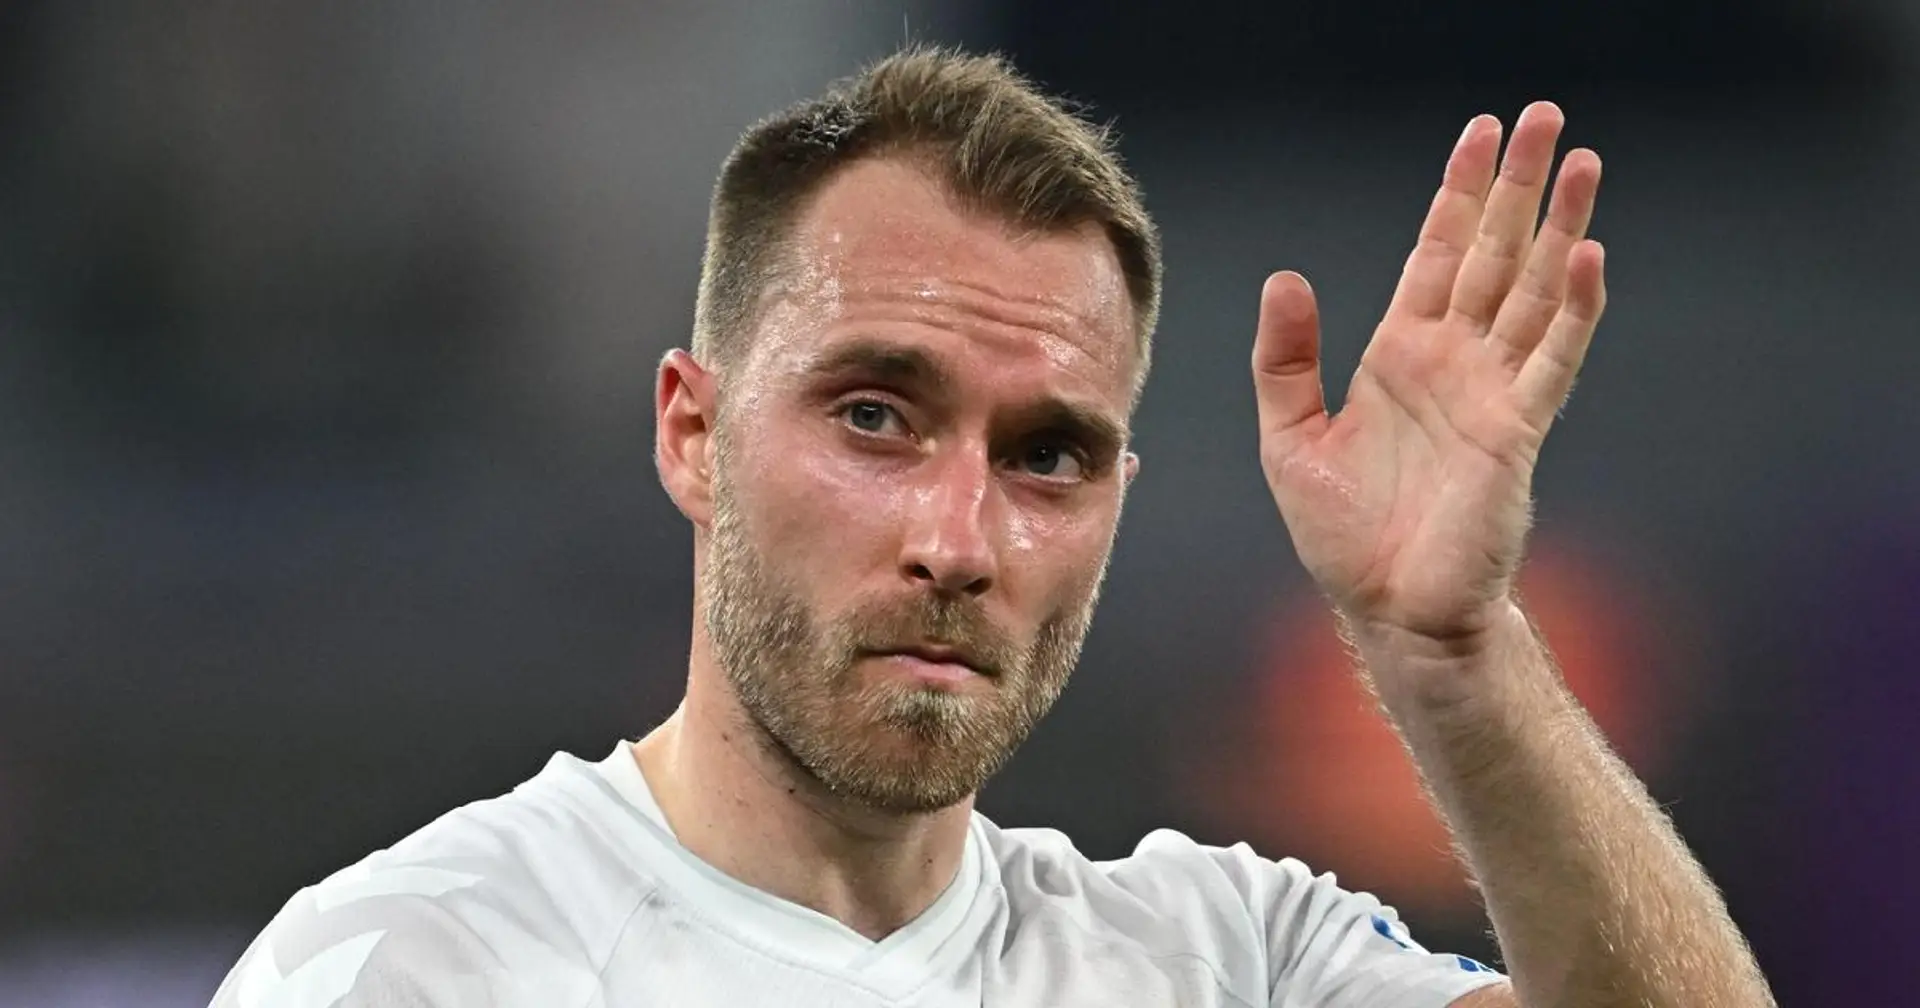 Christian Eriksen becomes first Man United player eliminated from World Cup